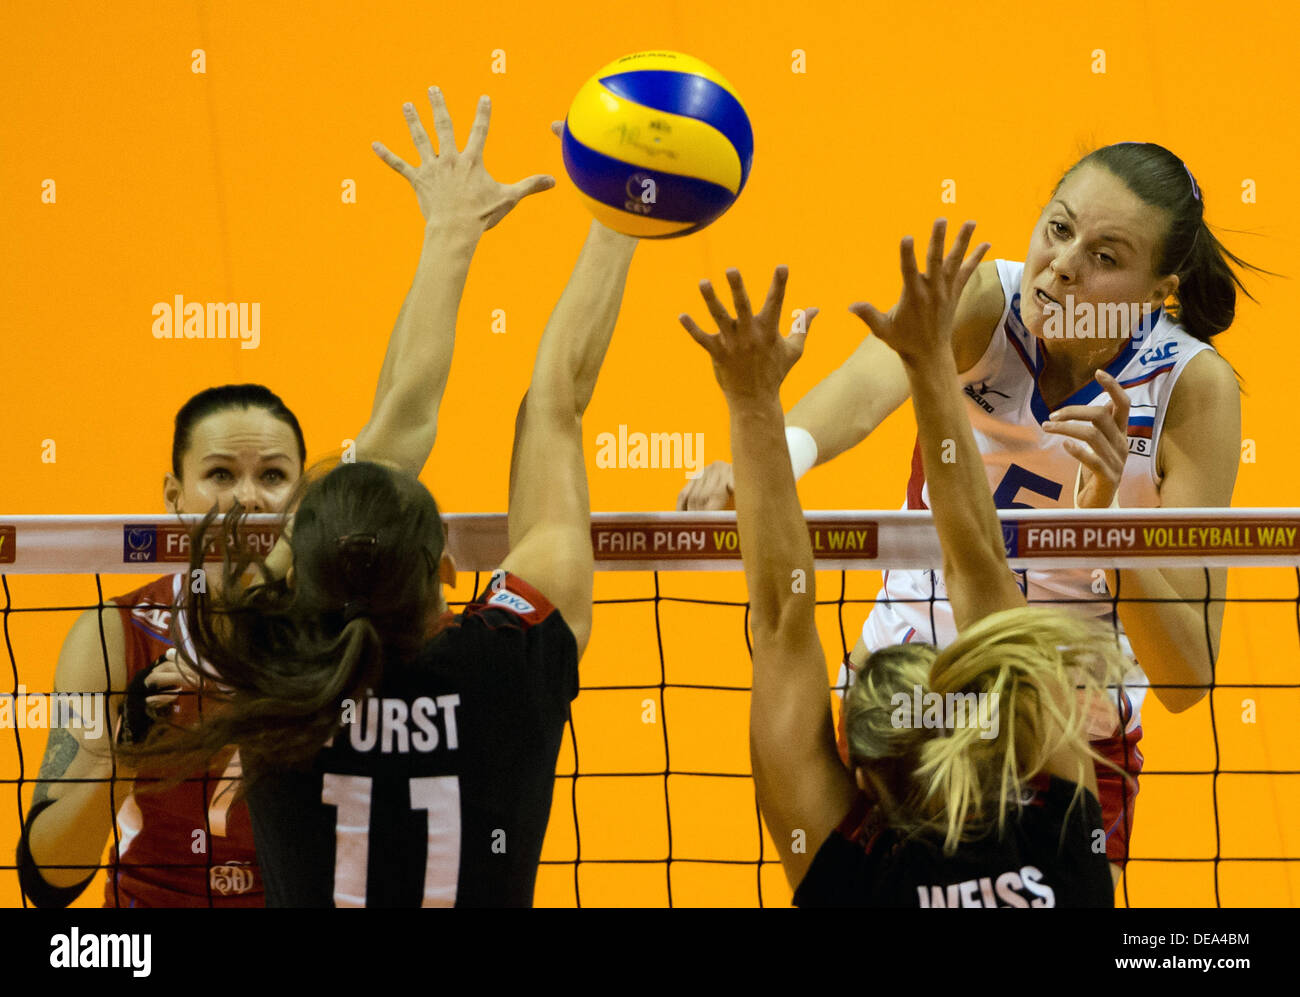 Russia's Alexandra Pasynkowa (R) in action during their women's CEV  Volleyball European Championship final match between Germany and Russia at  Max-Schmeling-Hall in Berlin, Germany, 14 September 2013. Photo: Soeren  Stache/dpa +++(c) dpa -